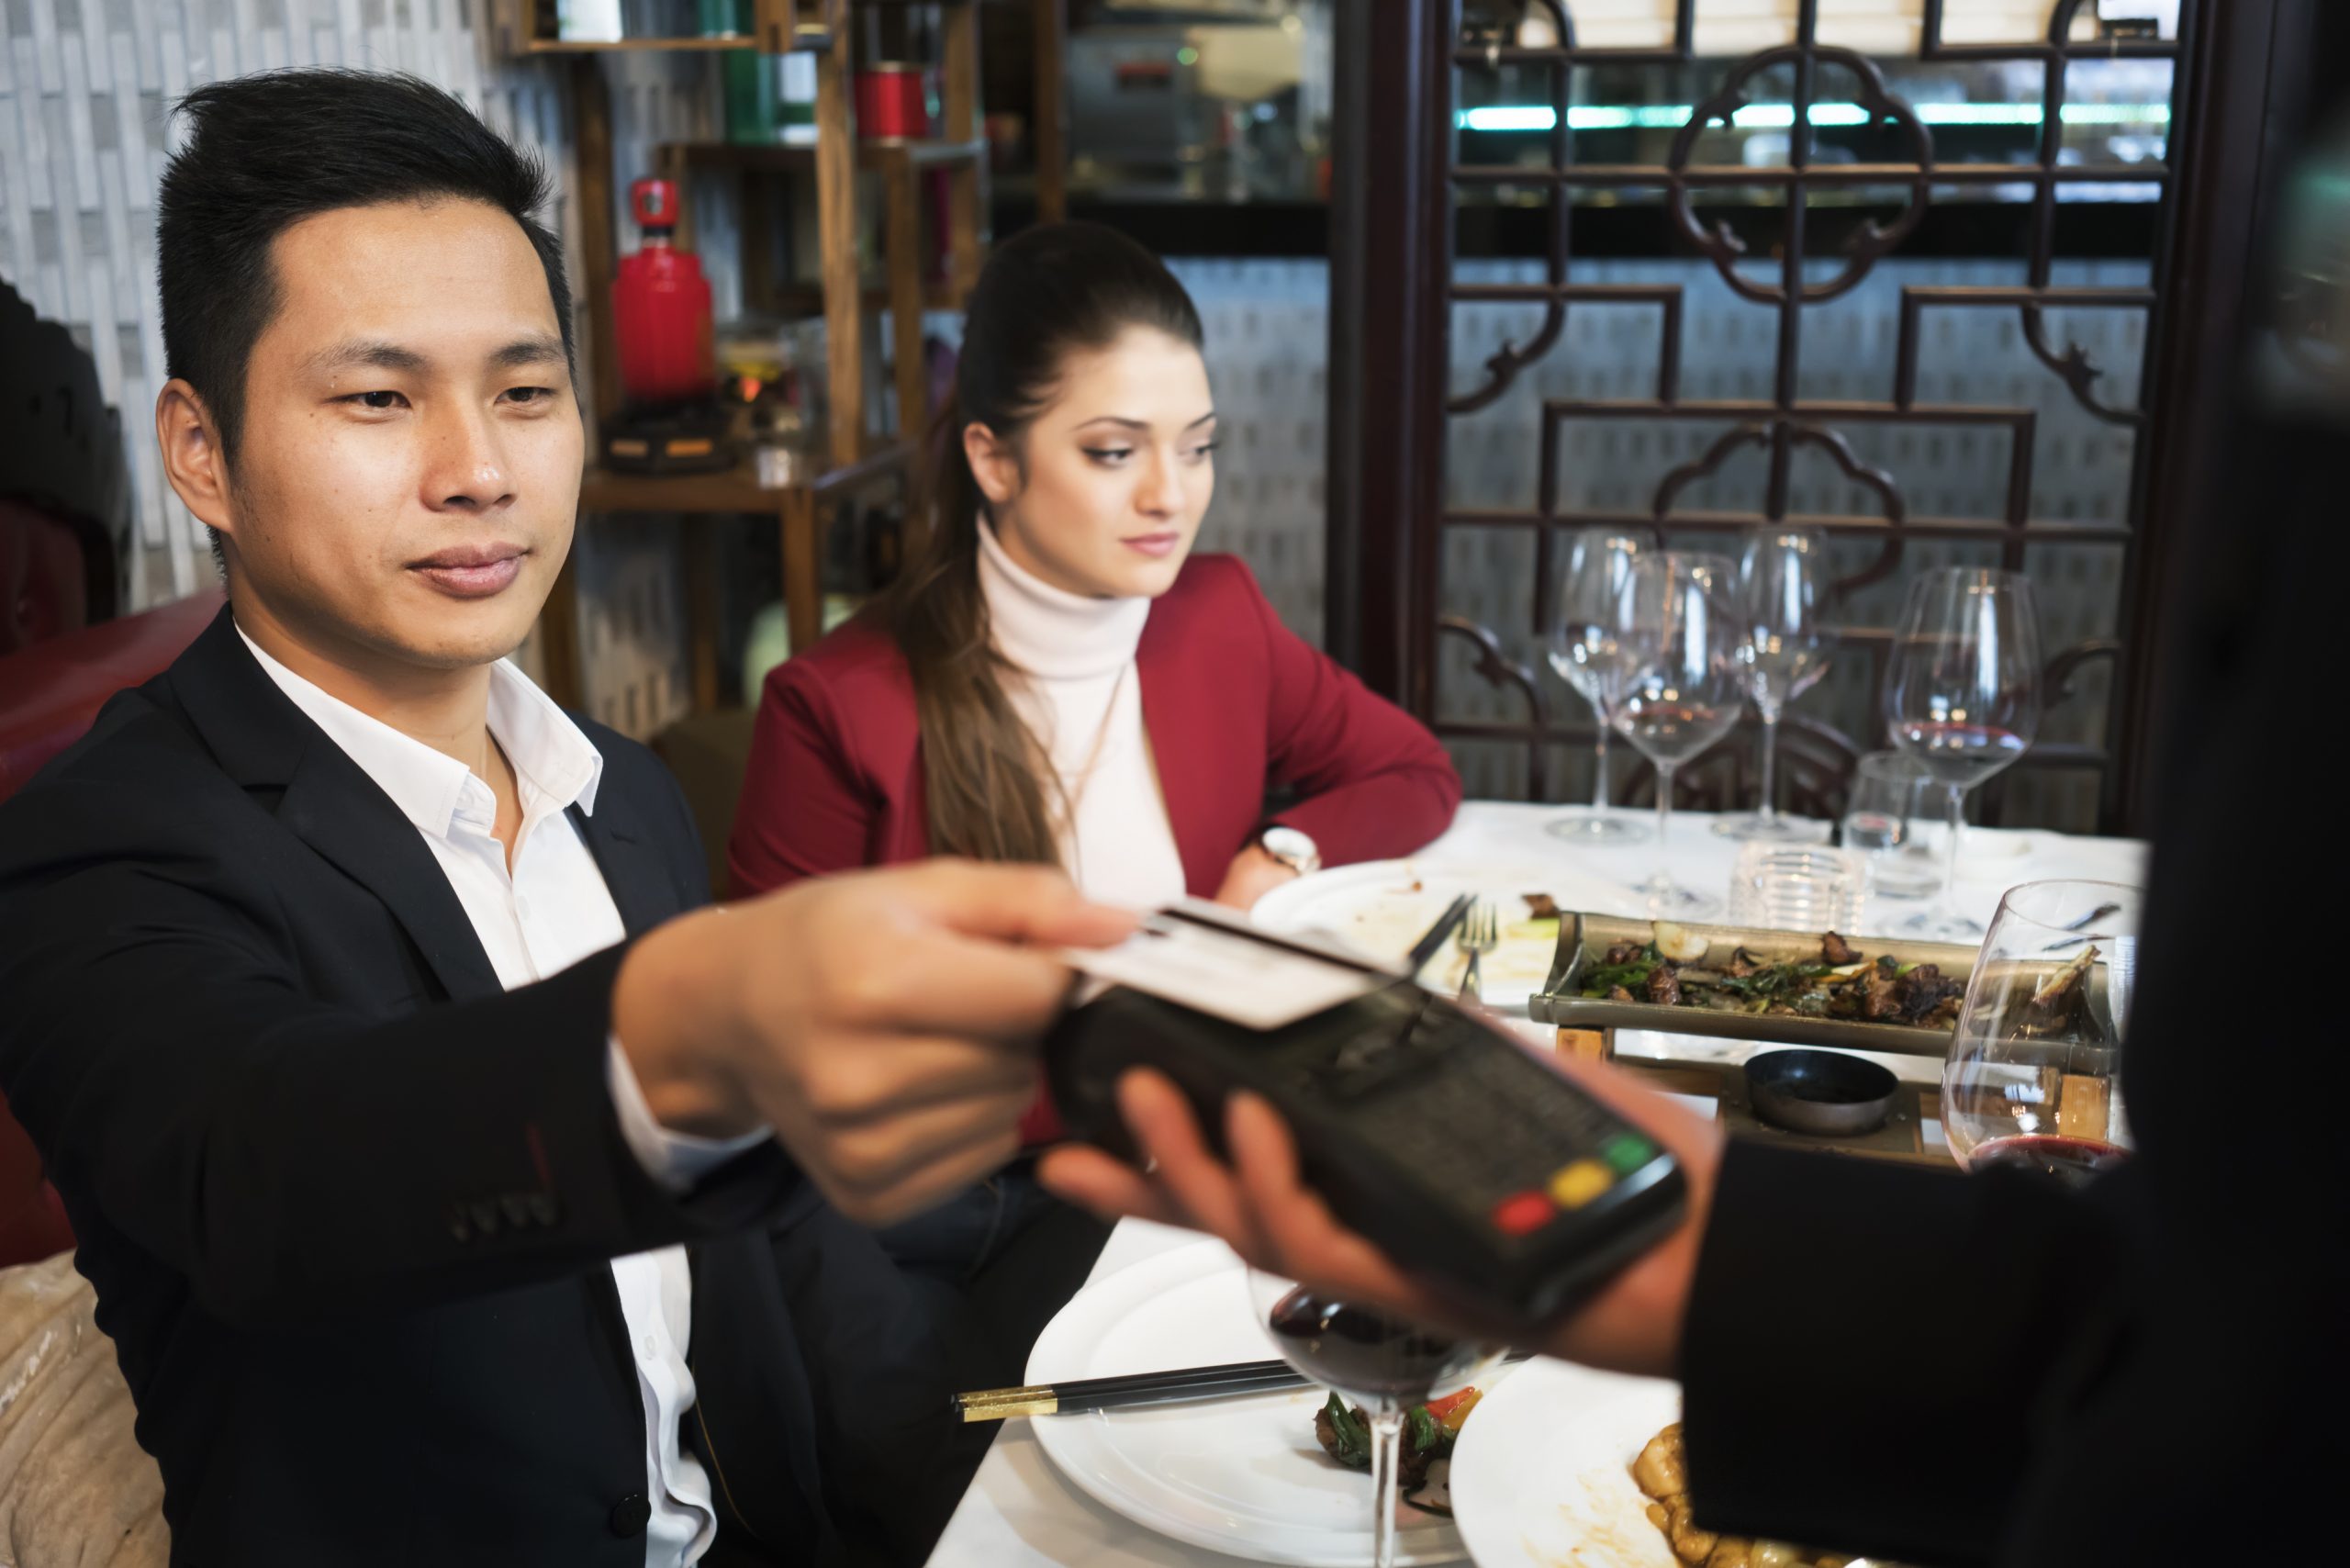 What Would You Do If Your Date's Card Declined?